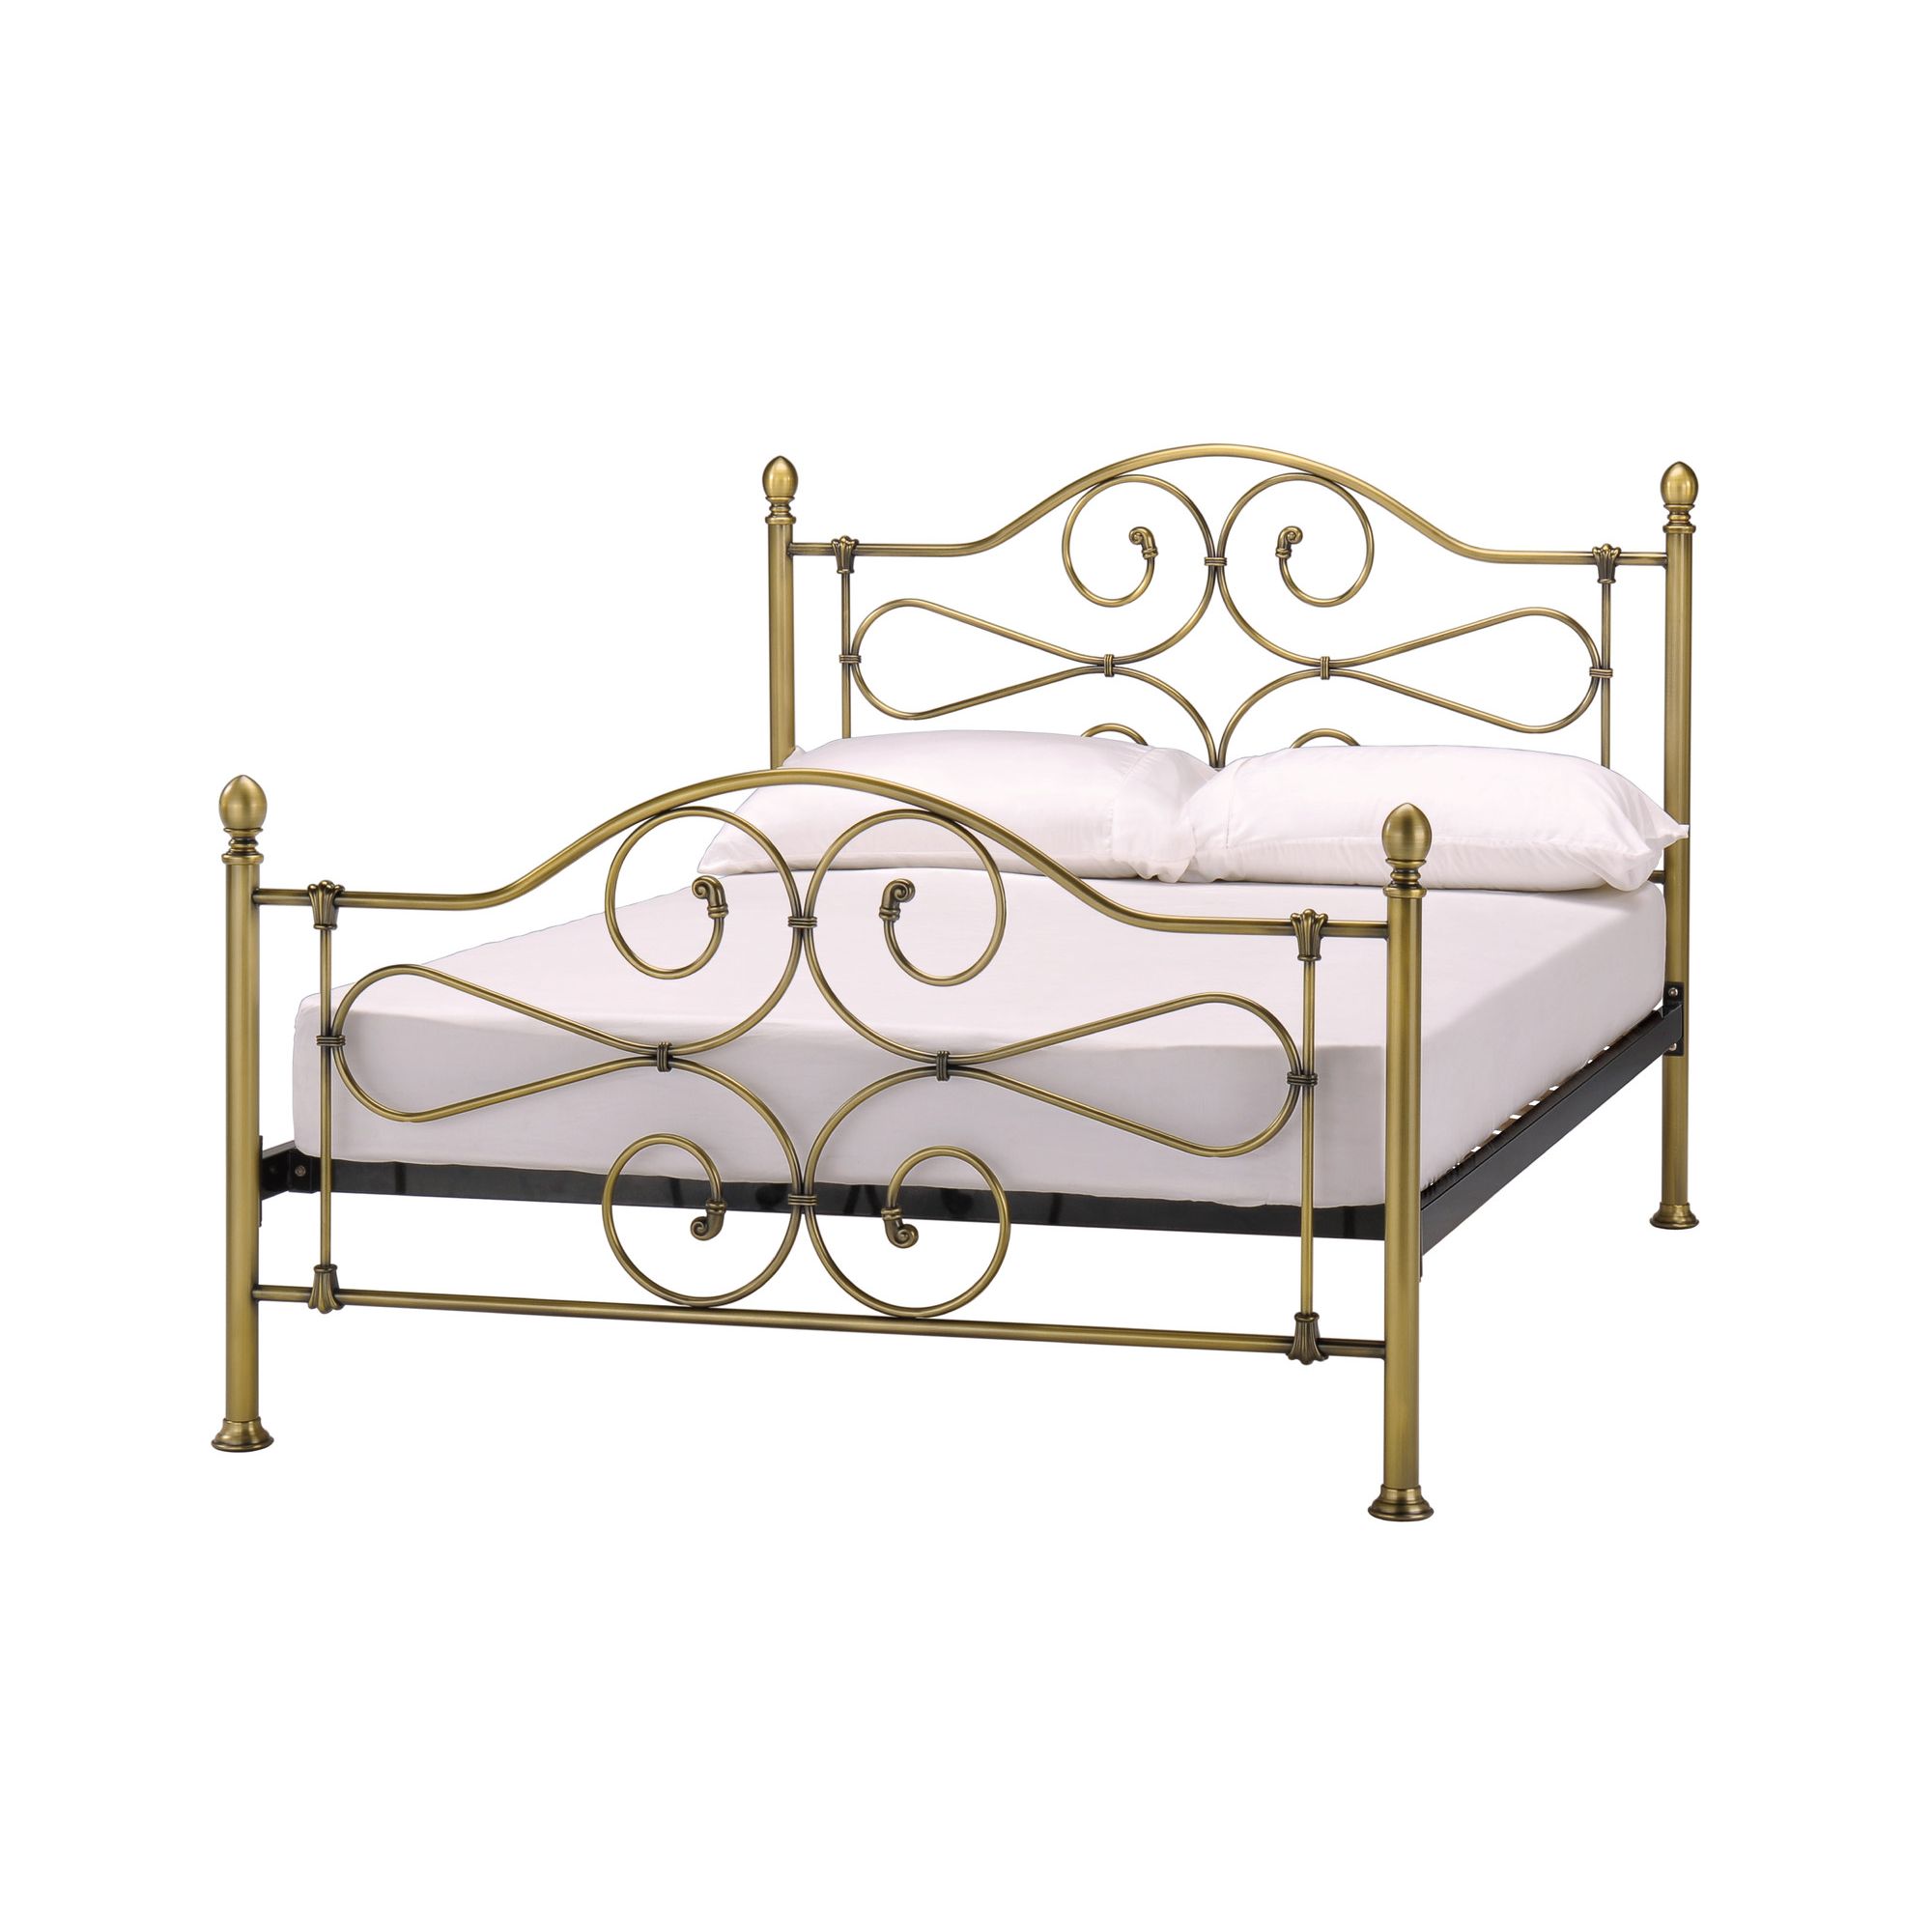 Serene Furnishings Florence Bed Frame - Double at Tesco Direct